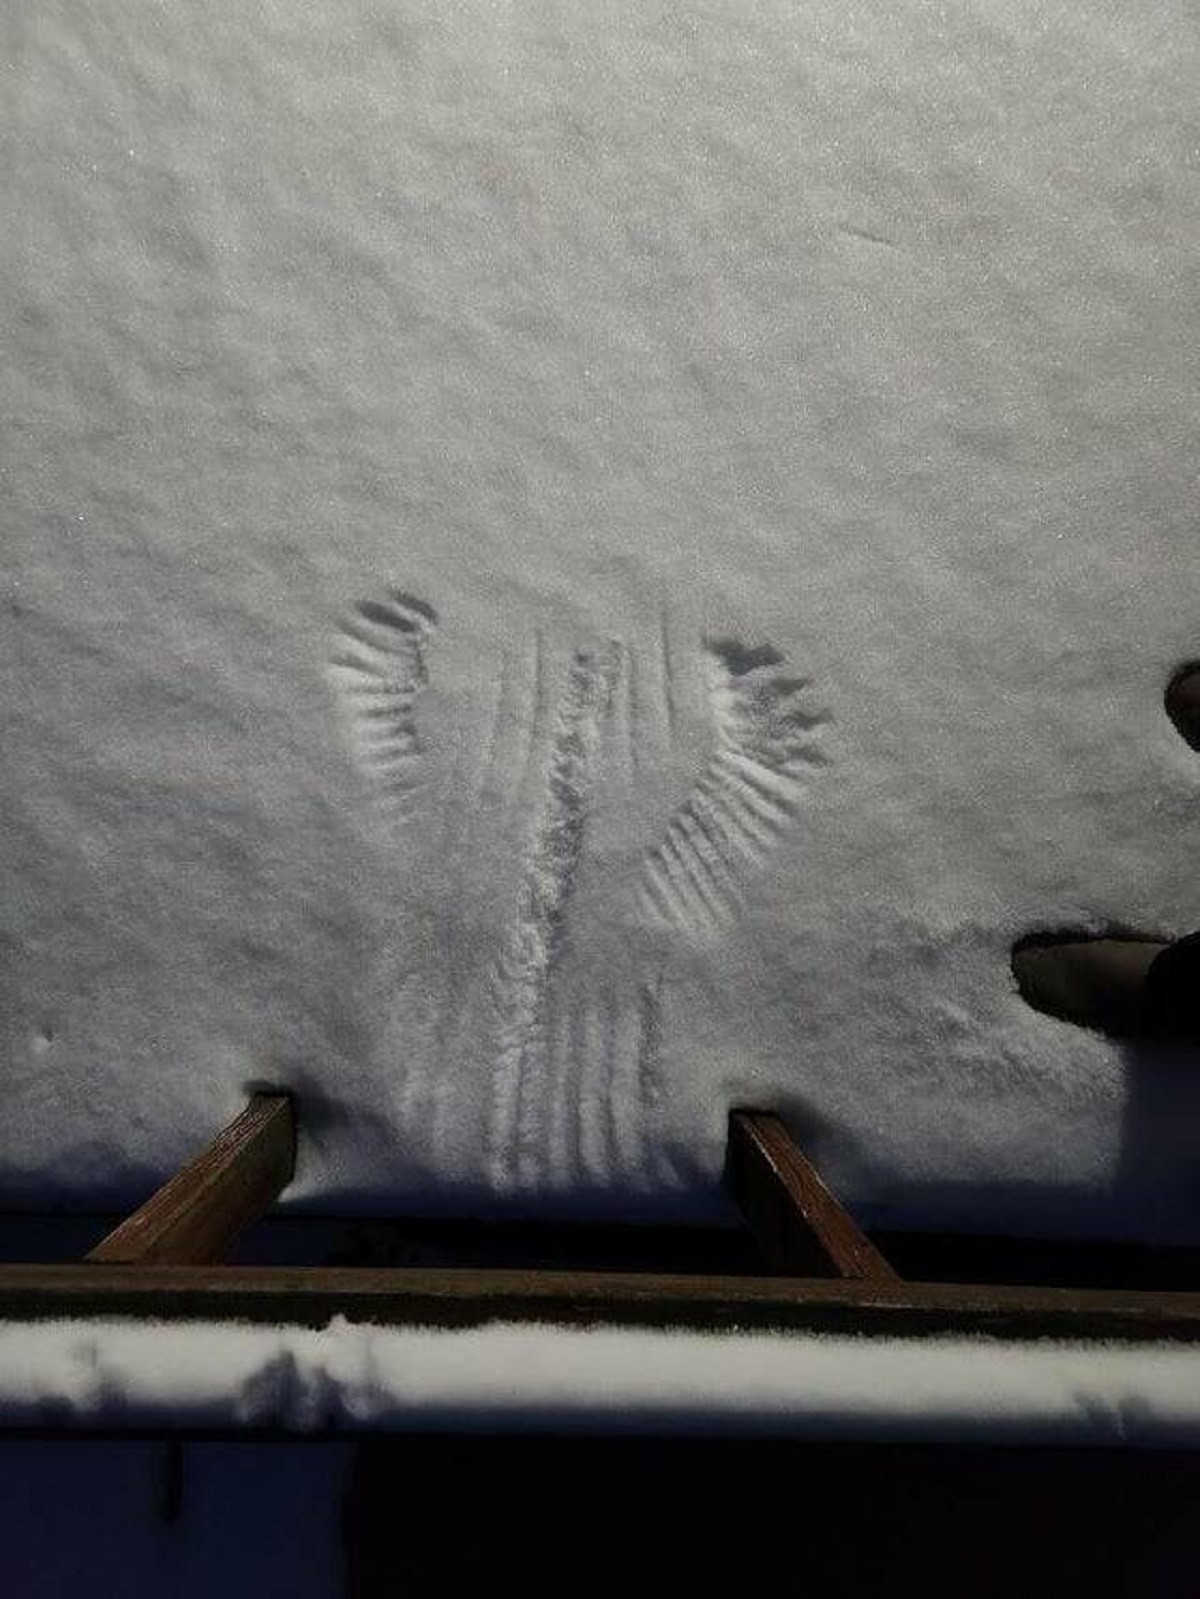 "Looks like something fell into the snow on my back deck."